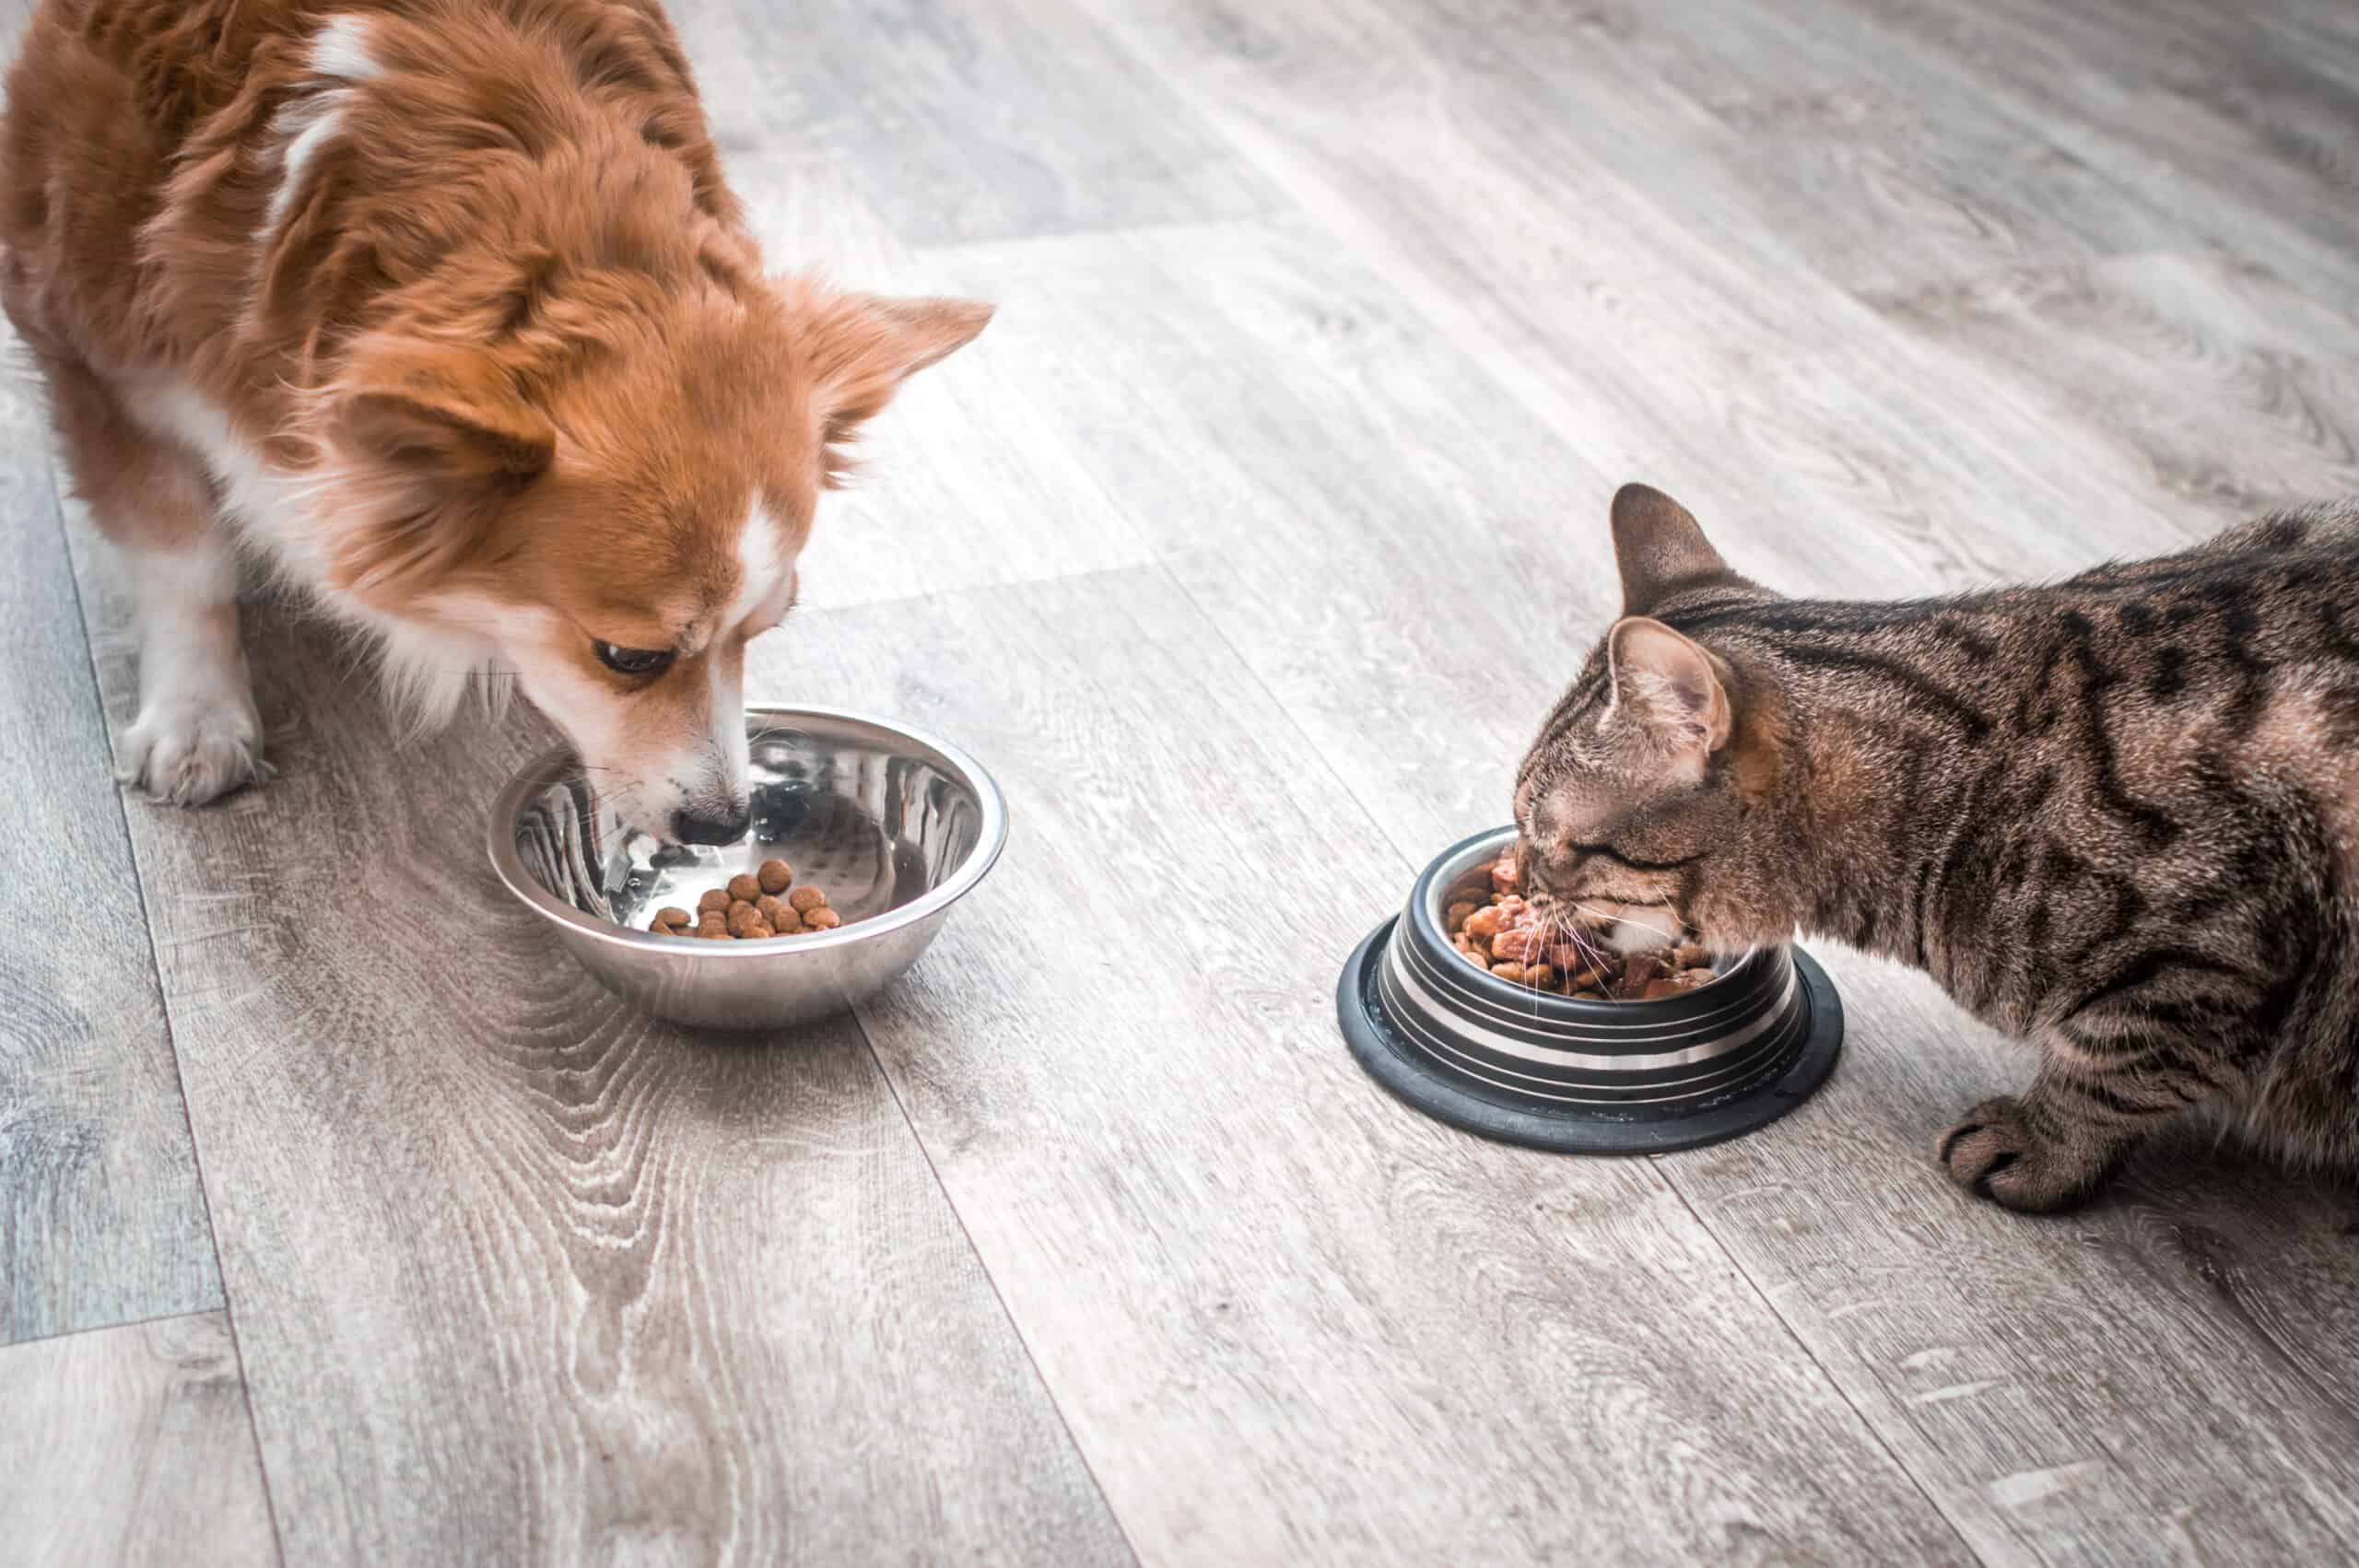 Dog and cat eating together.